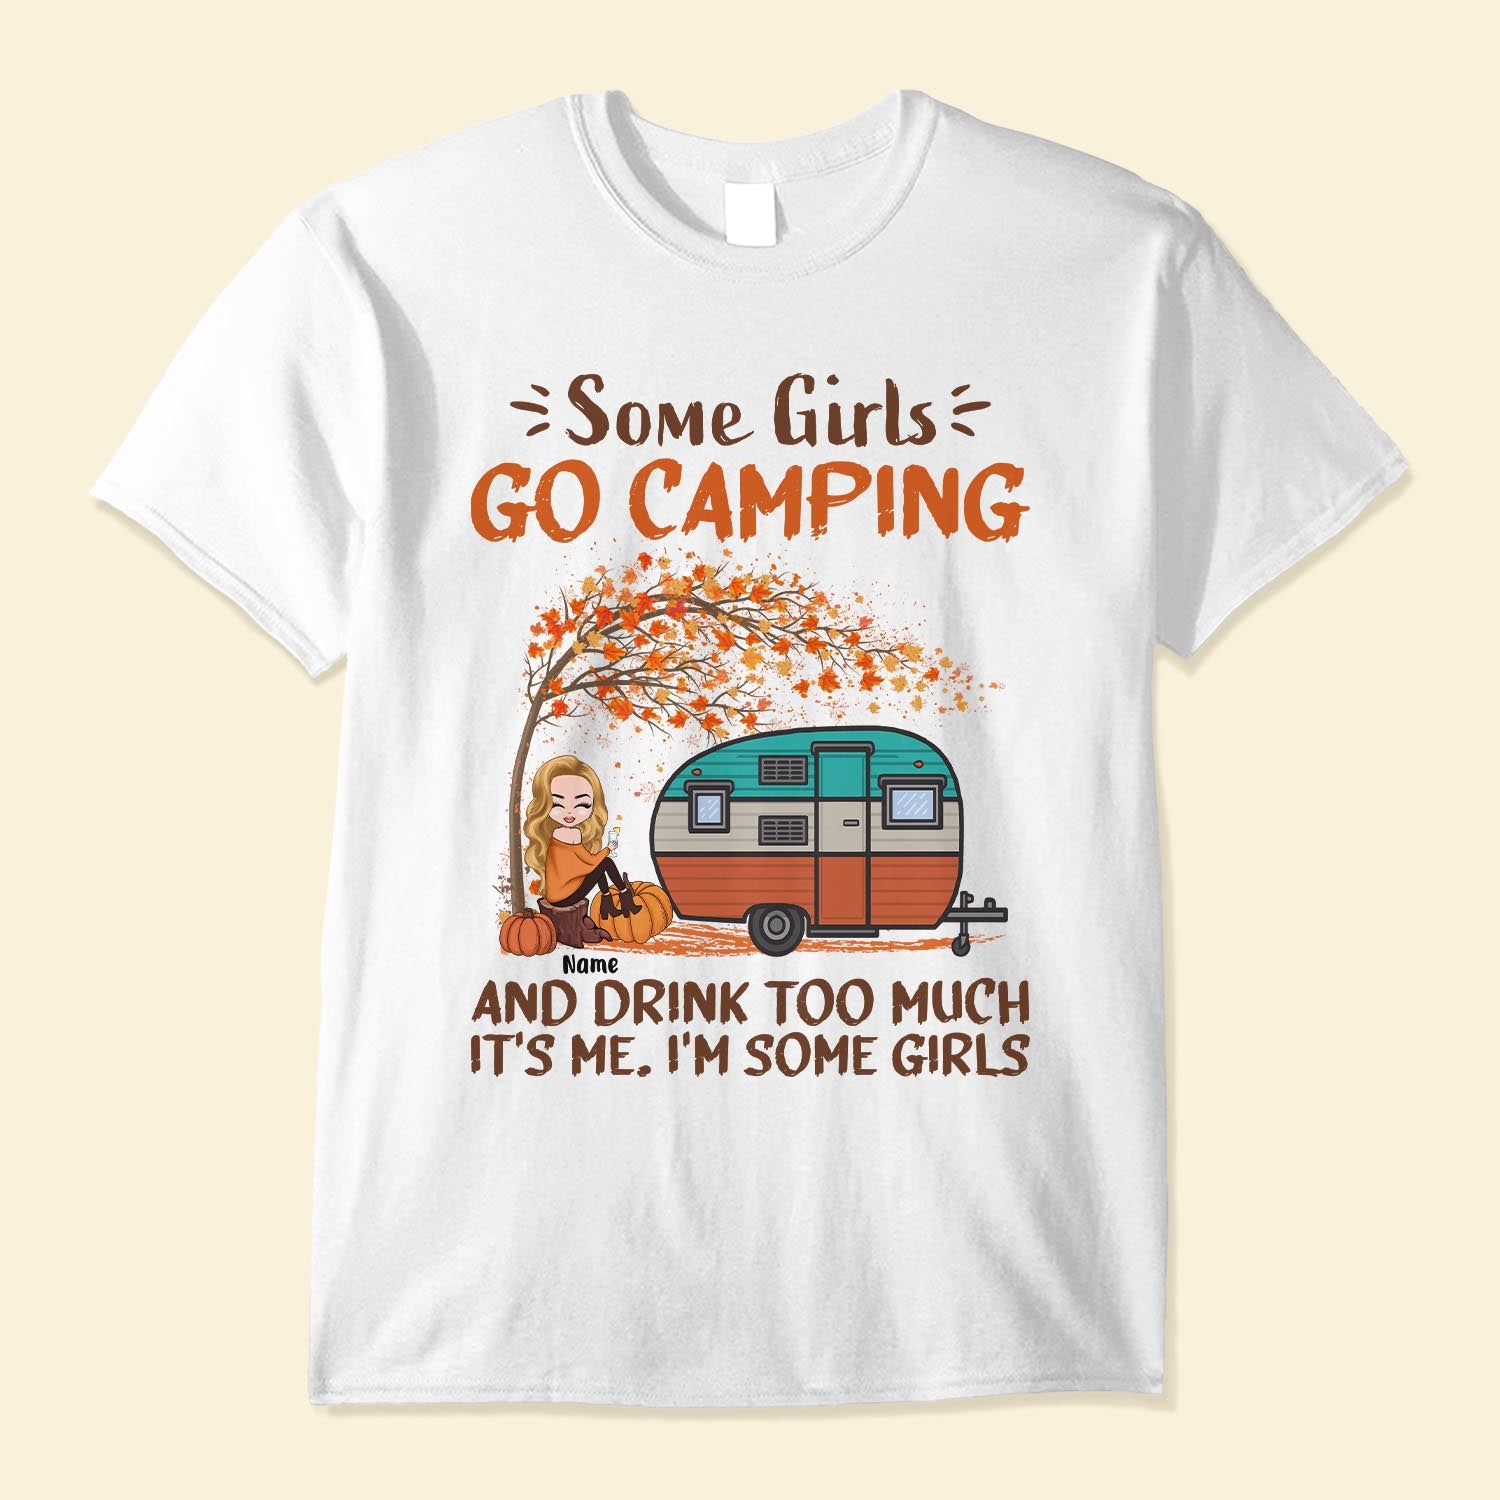 Some Girls Go Camping - Personalized Shirt - Fall Season Gift For Campers